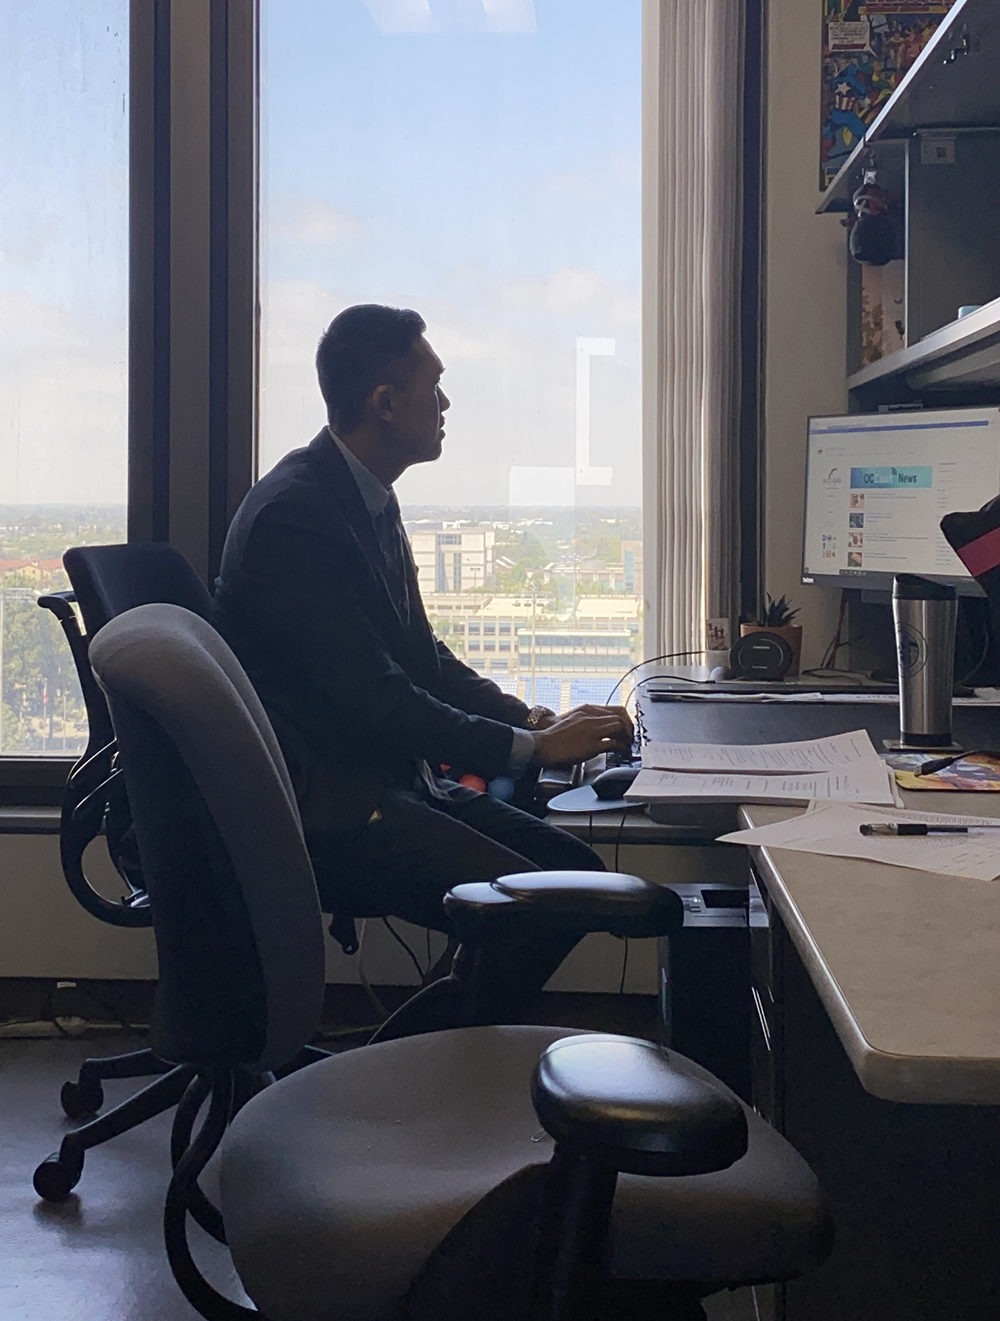 The silhouette of a man who sits in profile in a high-rise office.